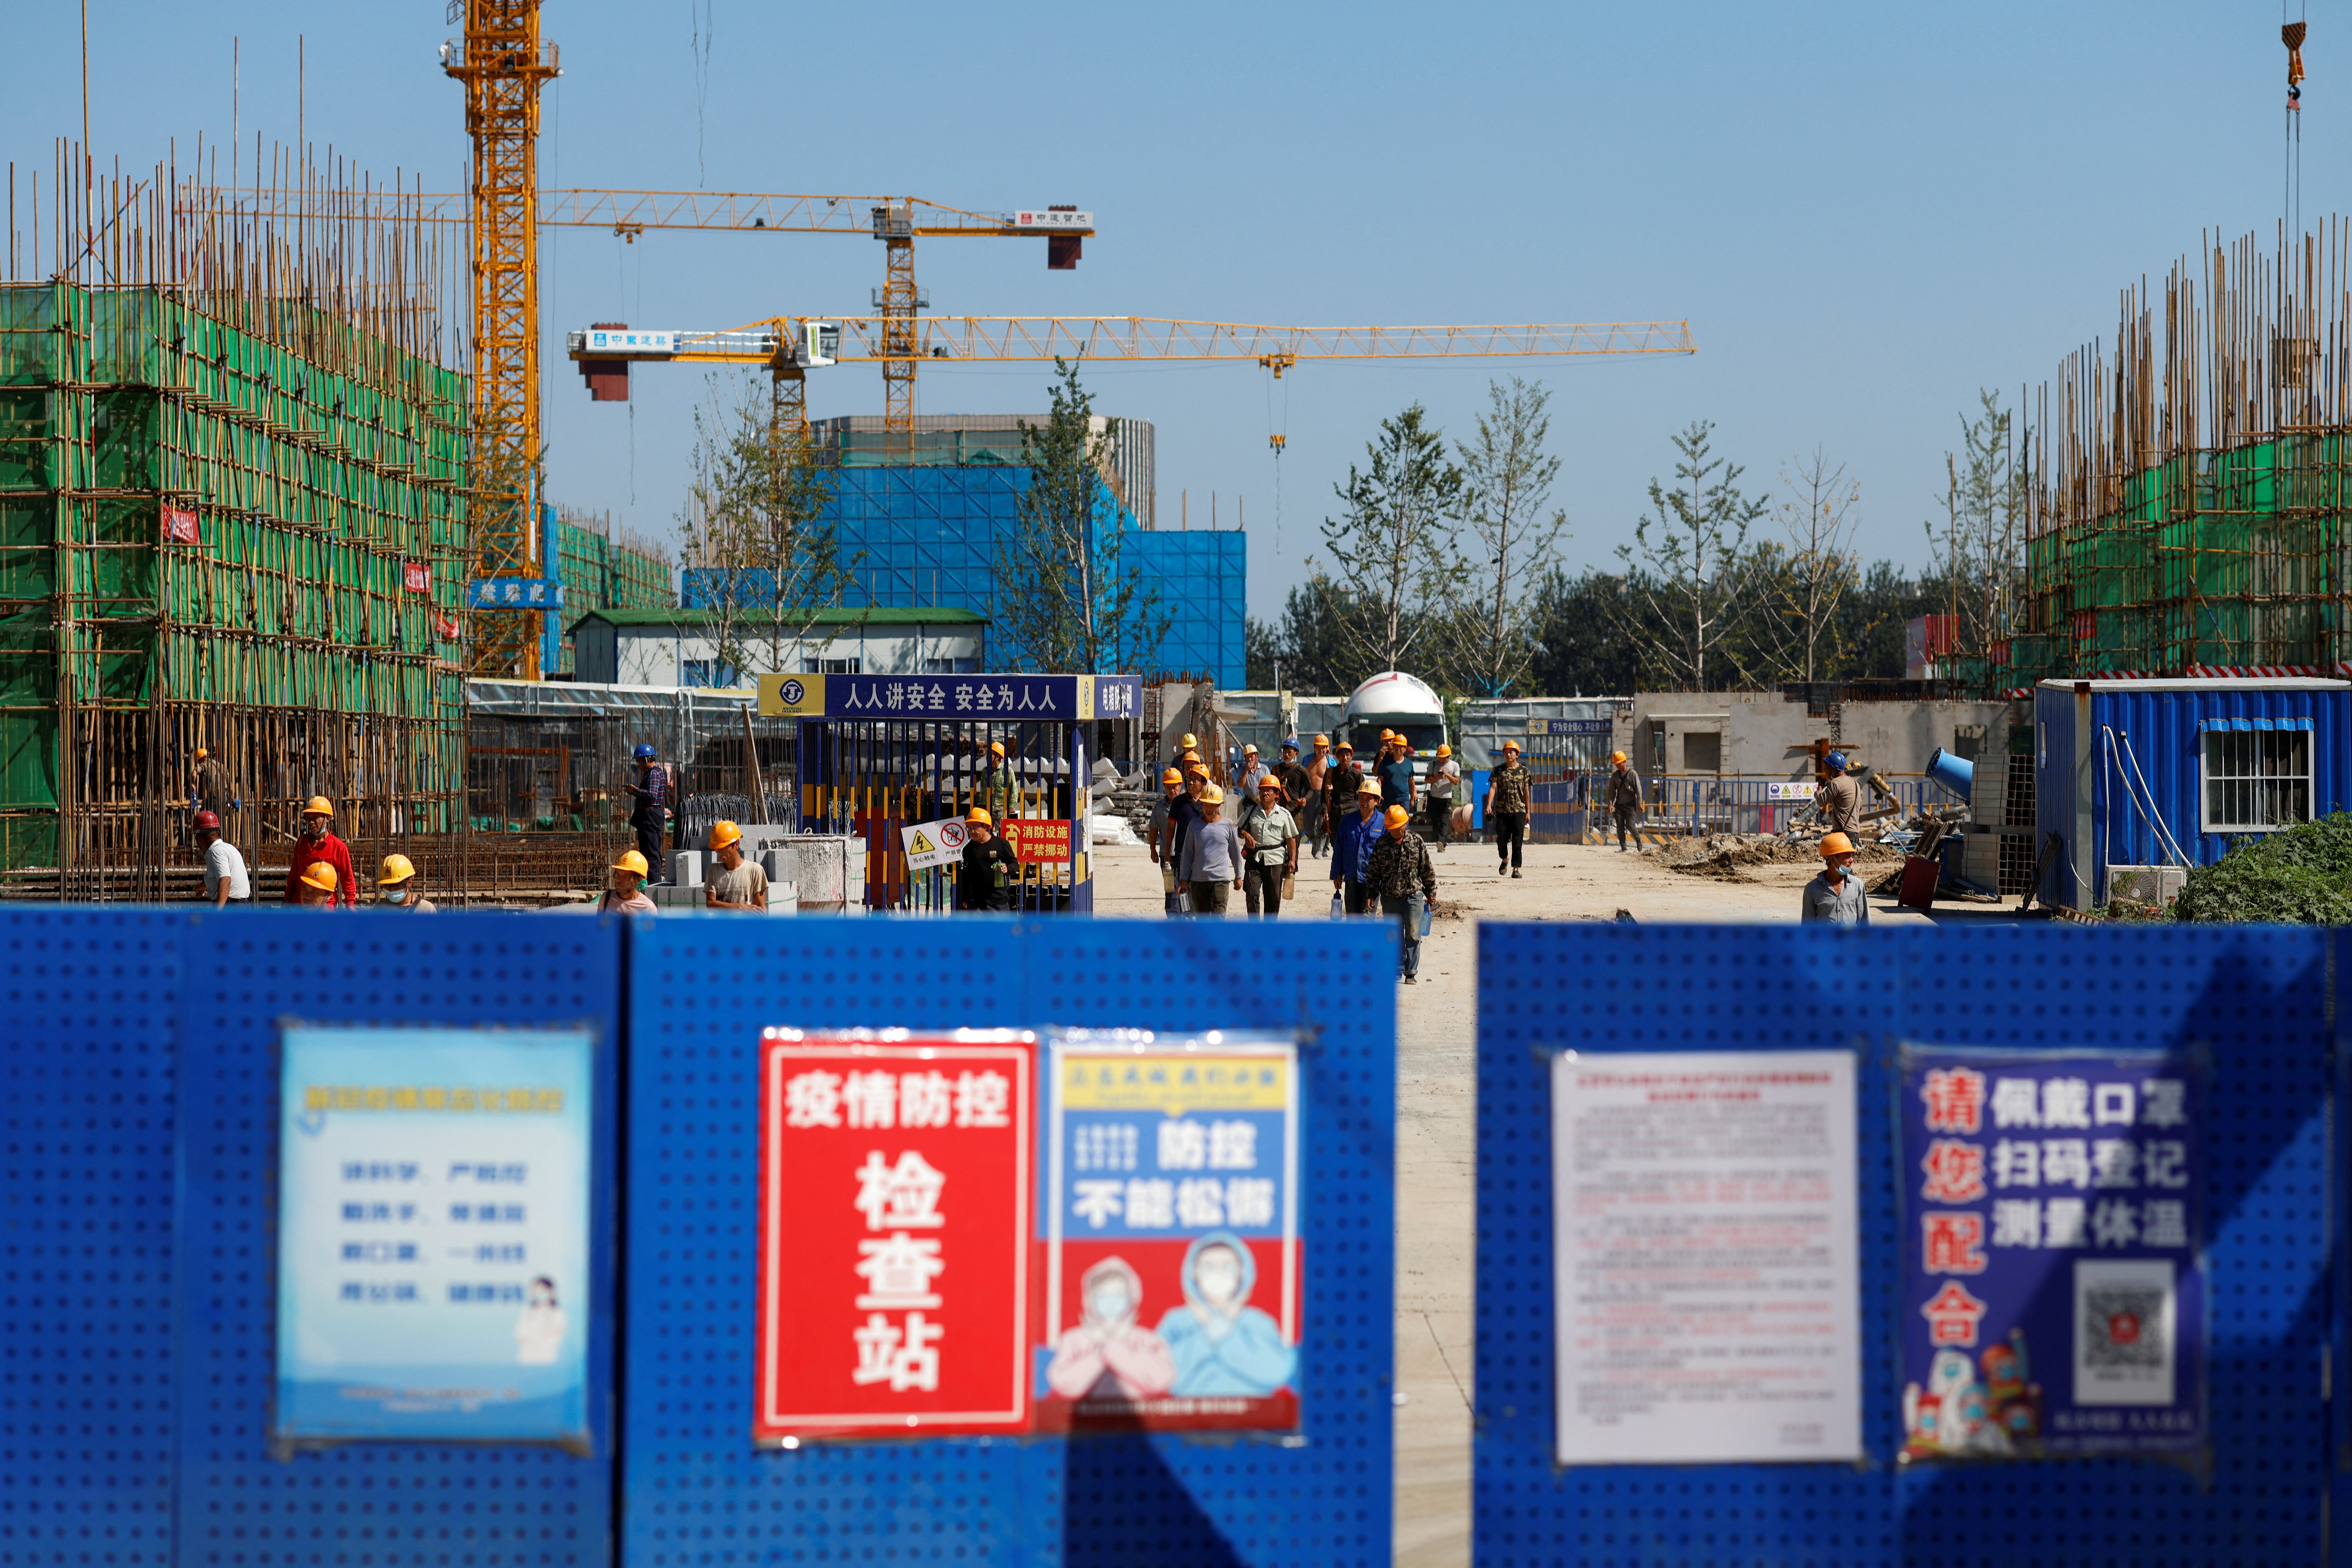 Workers walk inside the construction site of a project developed by China Evergrande Group in Beijing